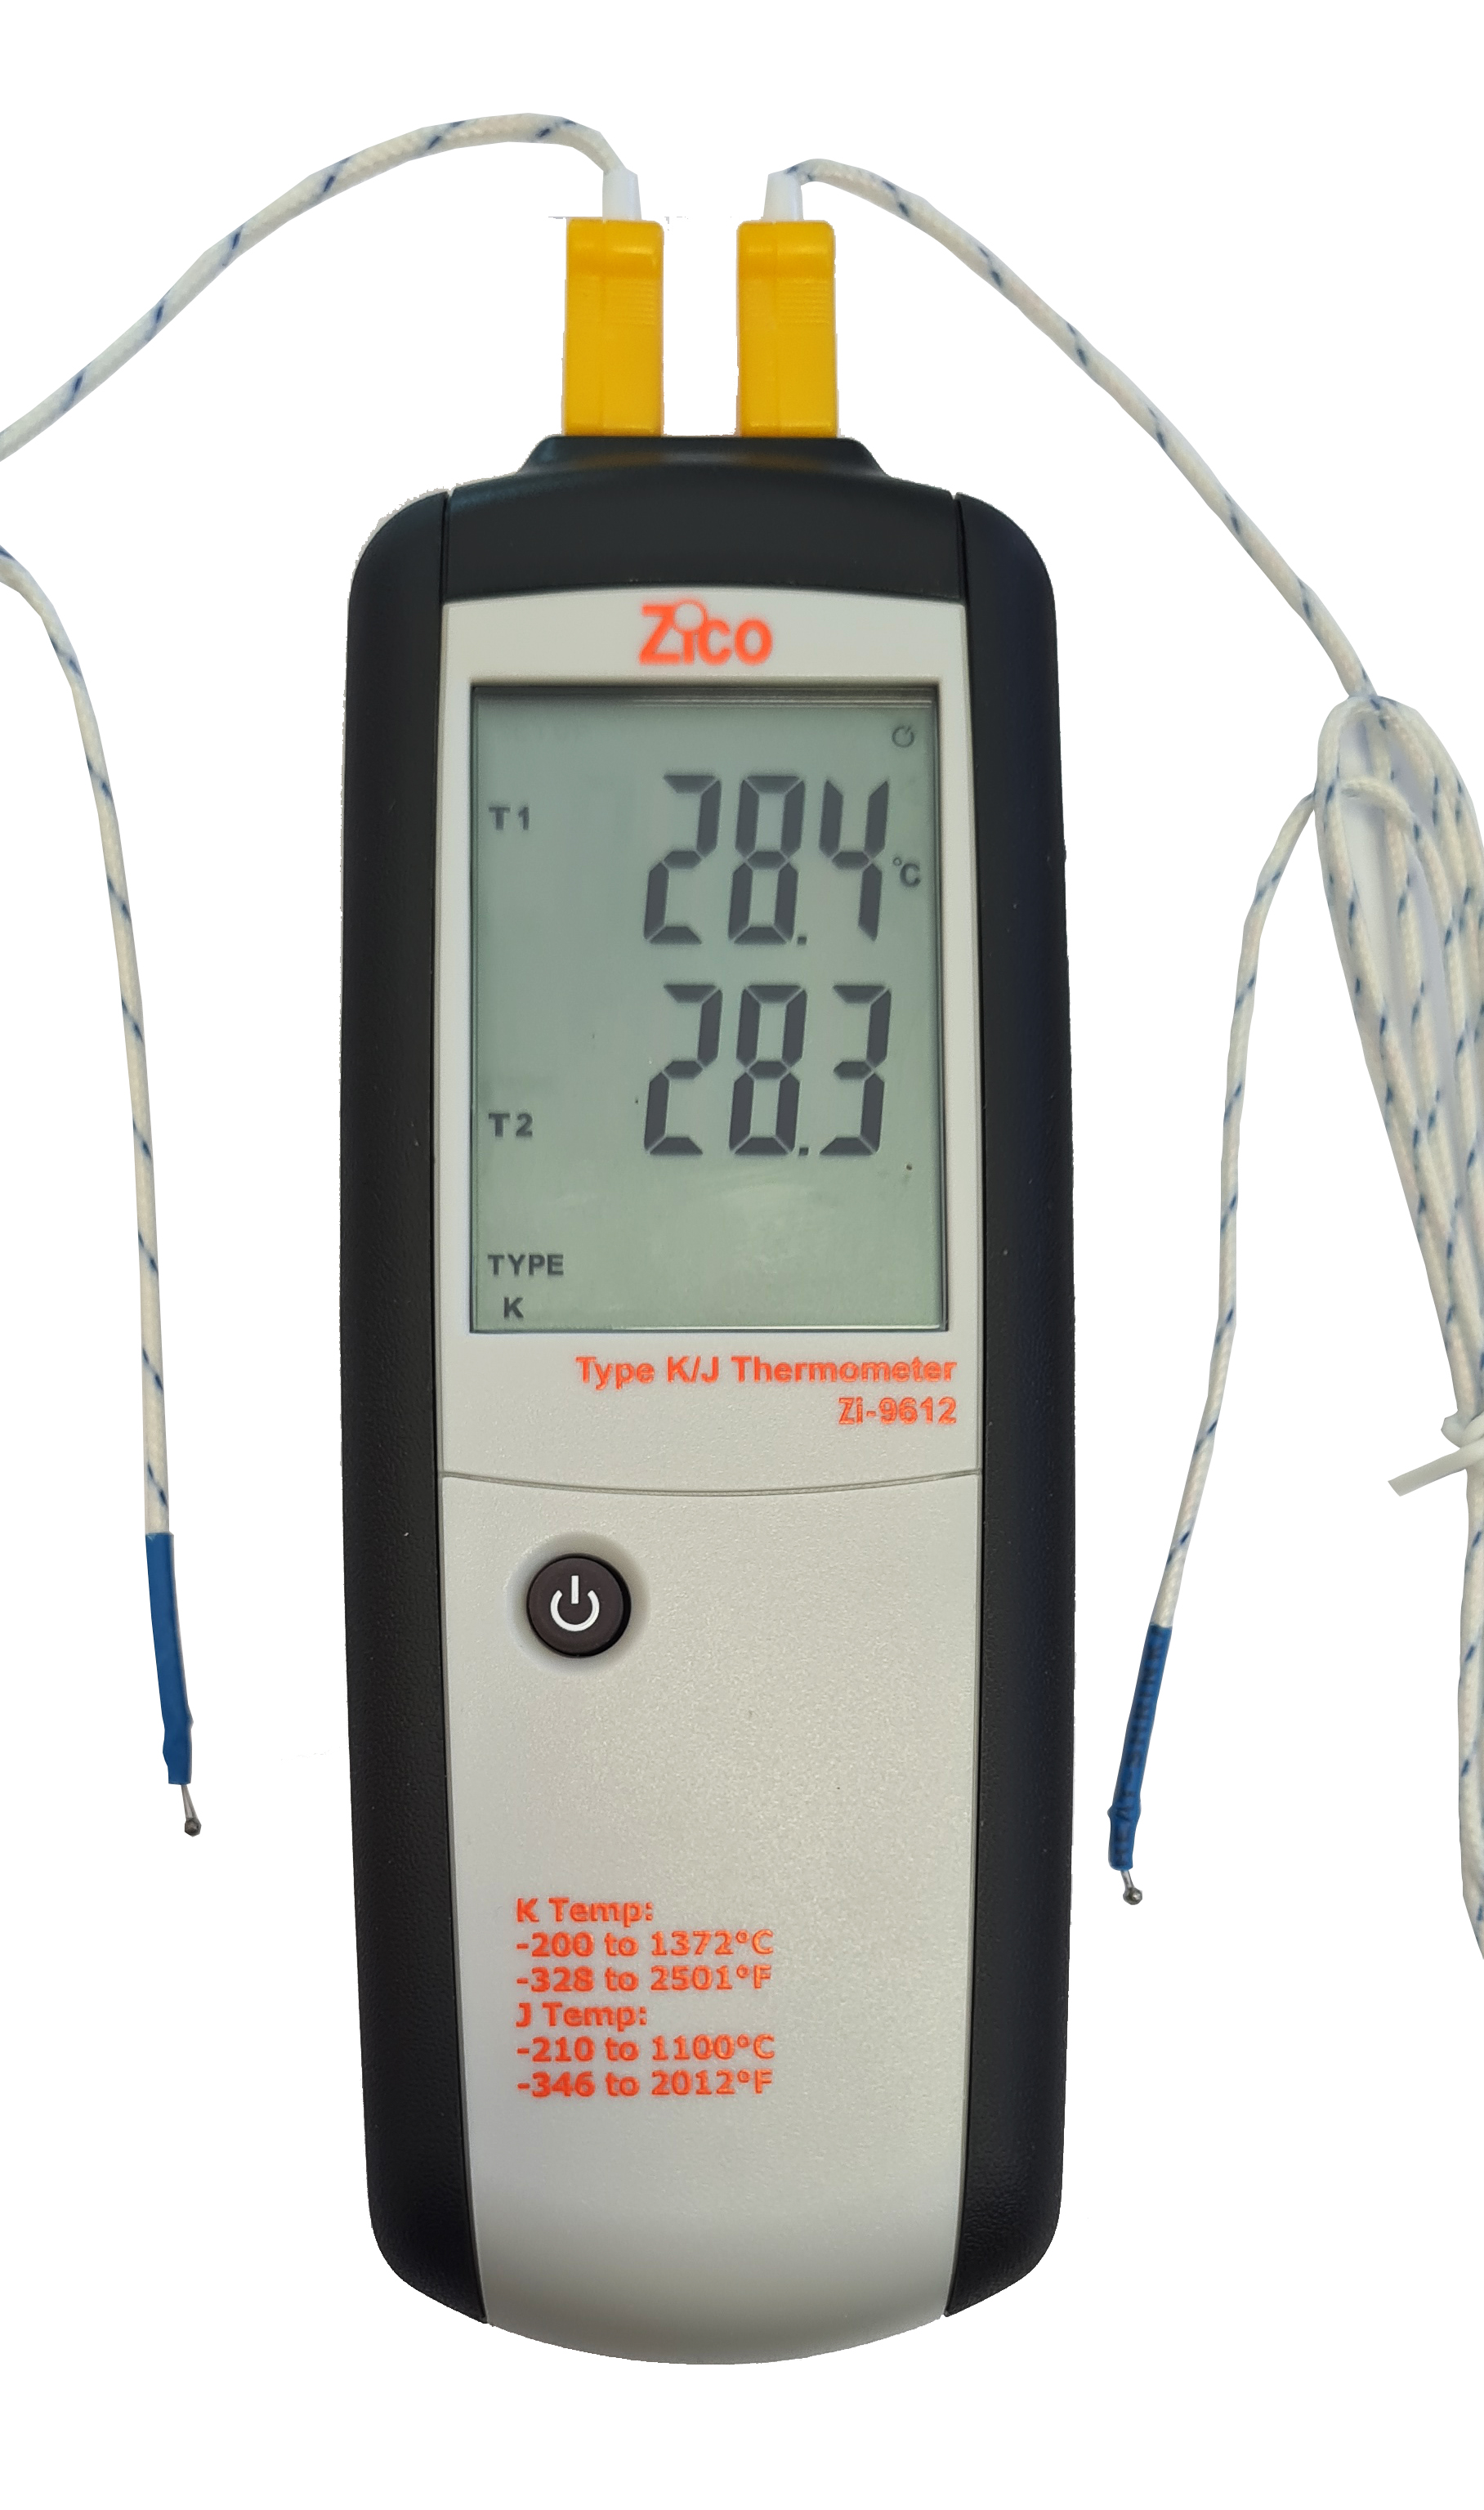 ZI-9612 Thermometers with 2 thermocouples